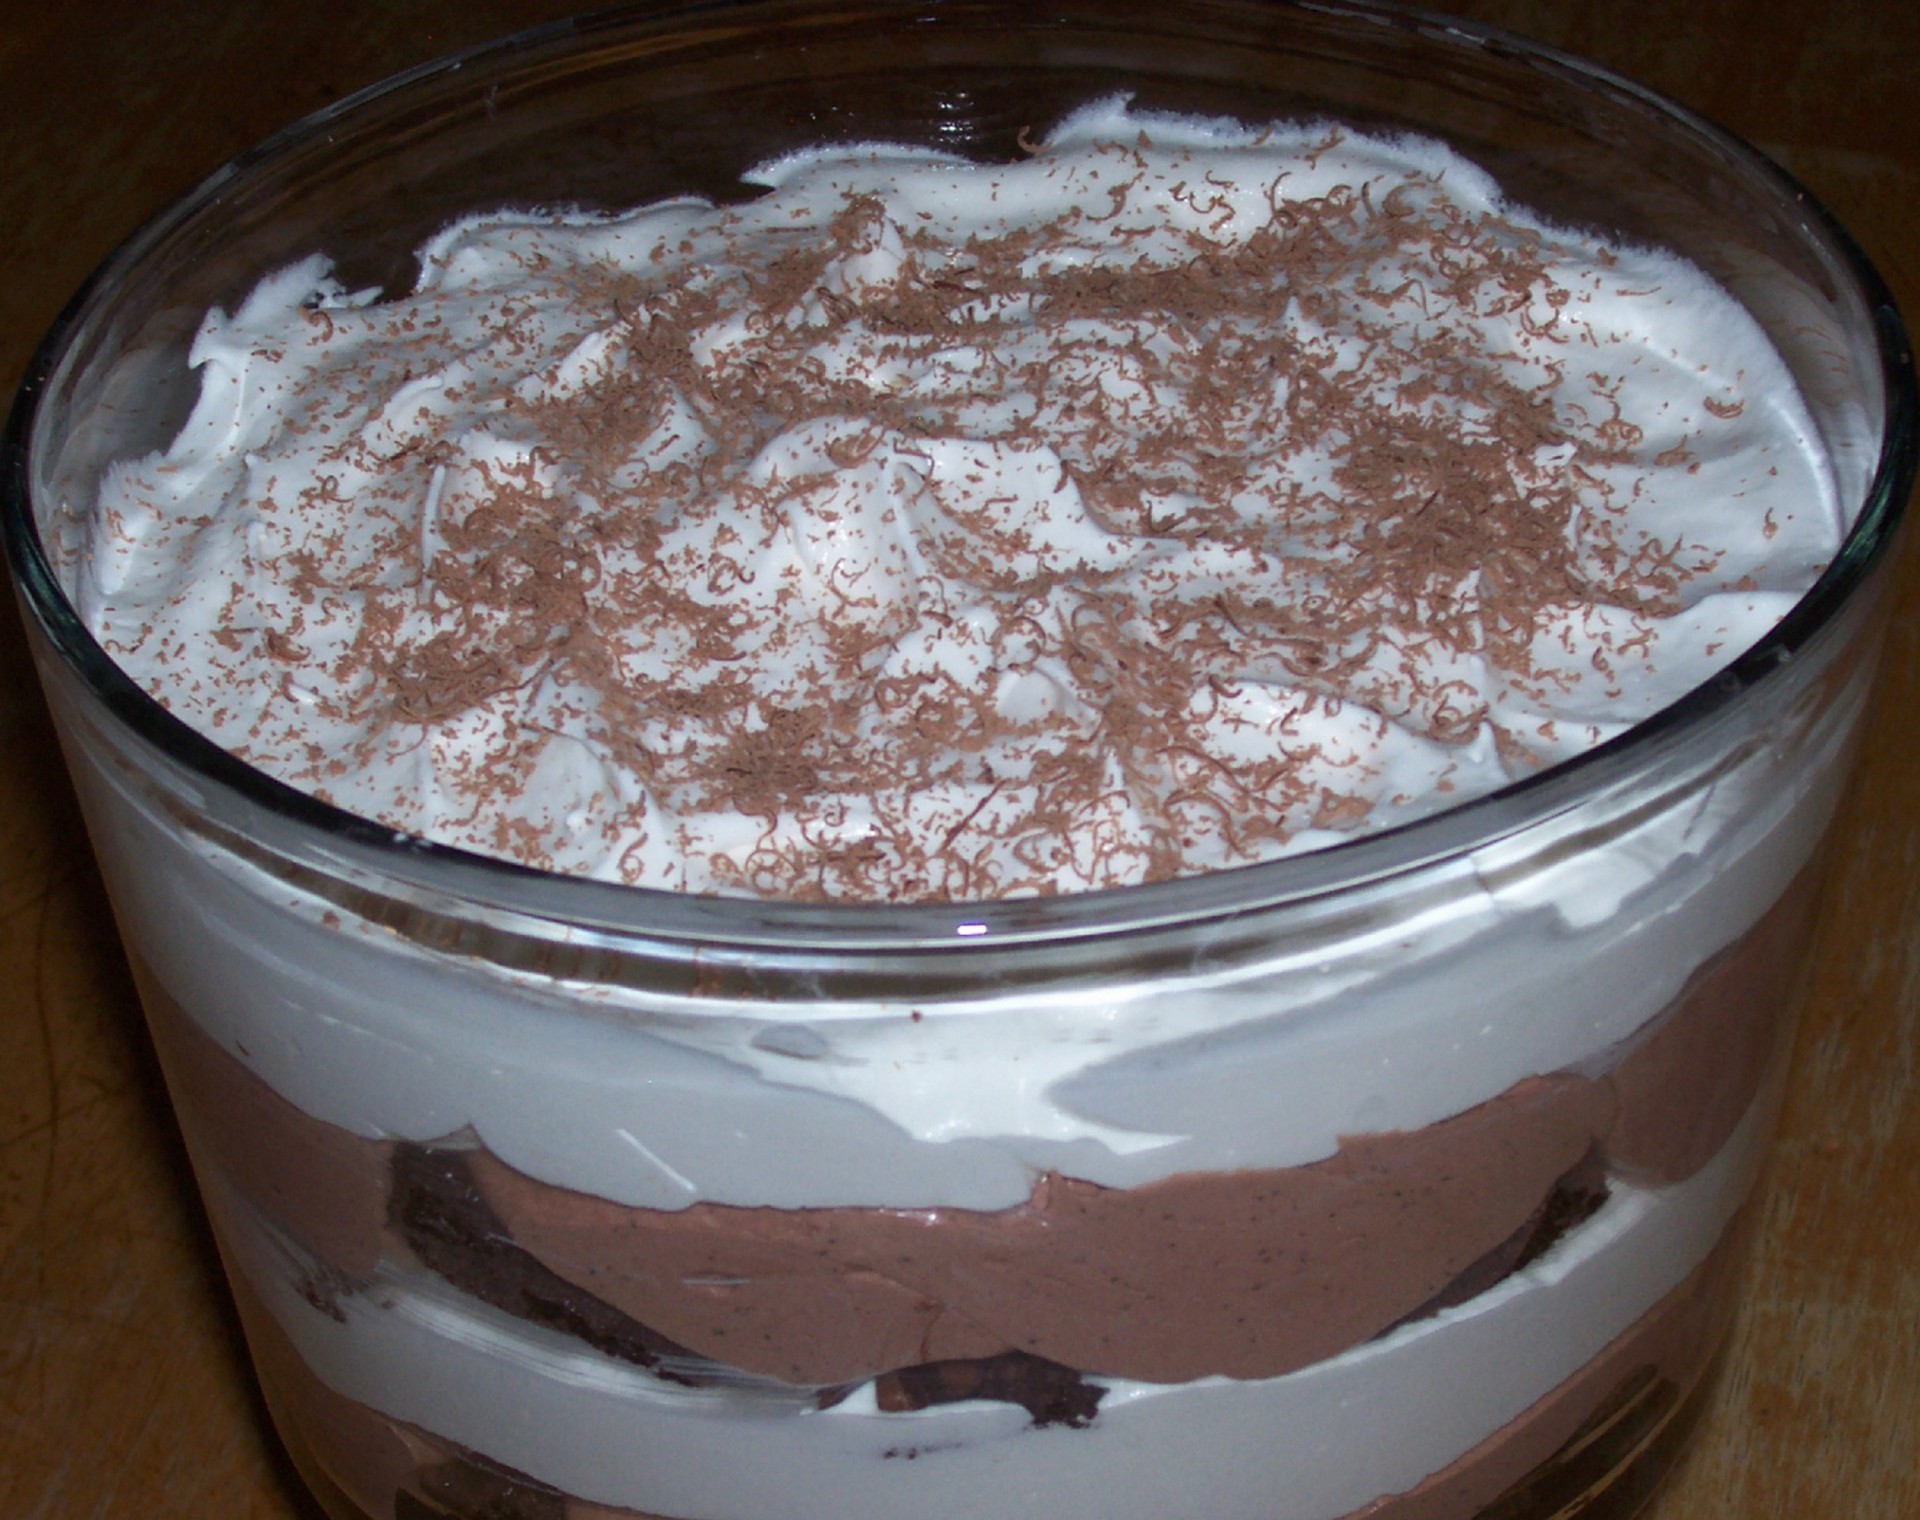 Black Forest Trifle